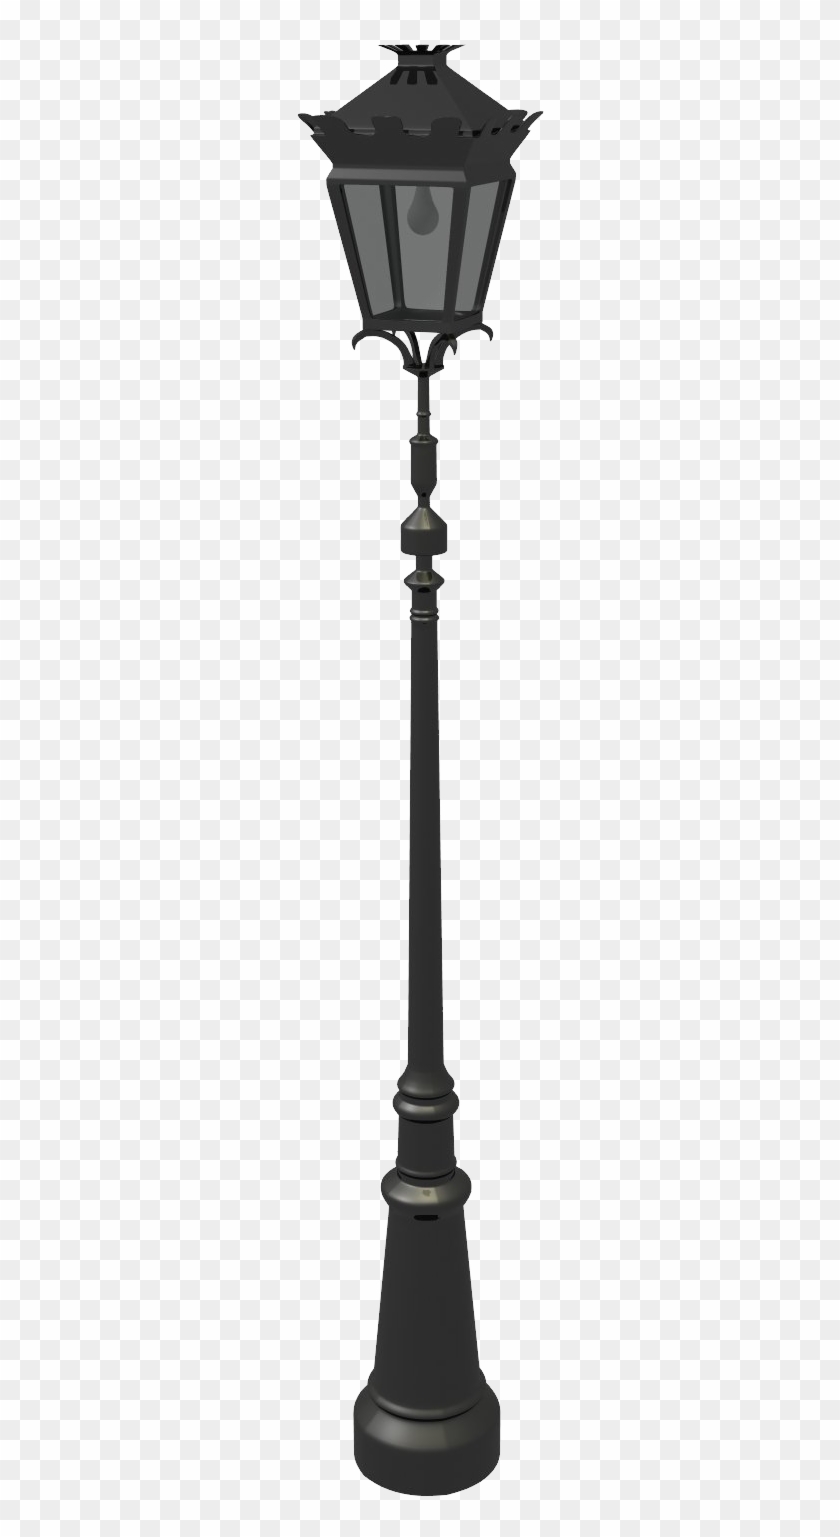 Awesome Street Light Png With Lantern Lamp Png - シルバニア ファミリー 街灯 #463846